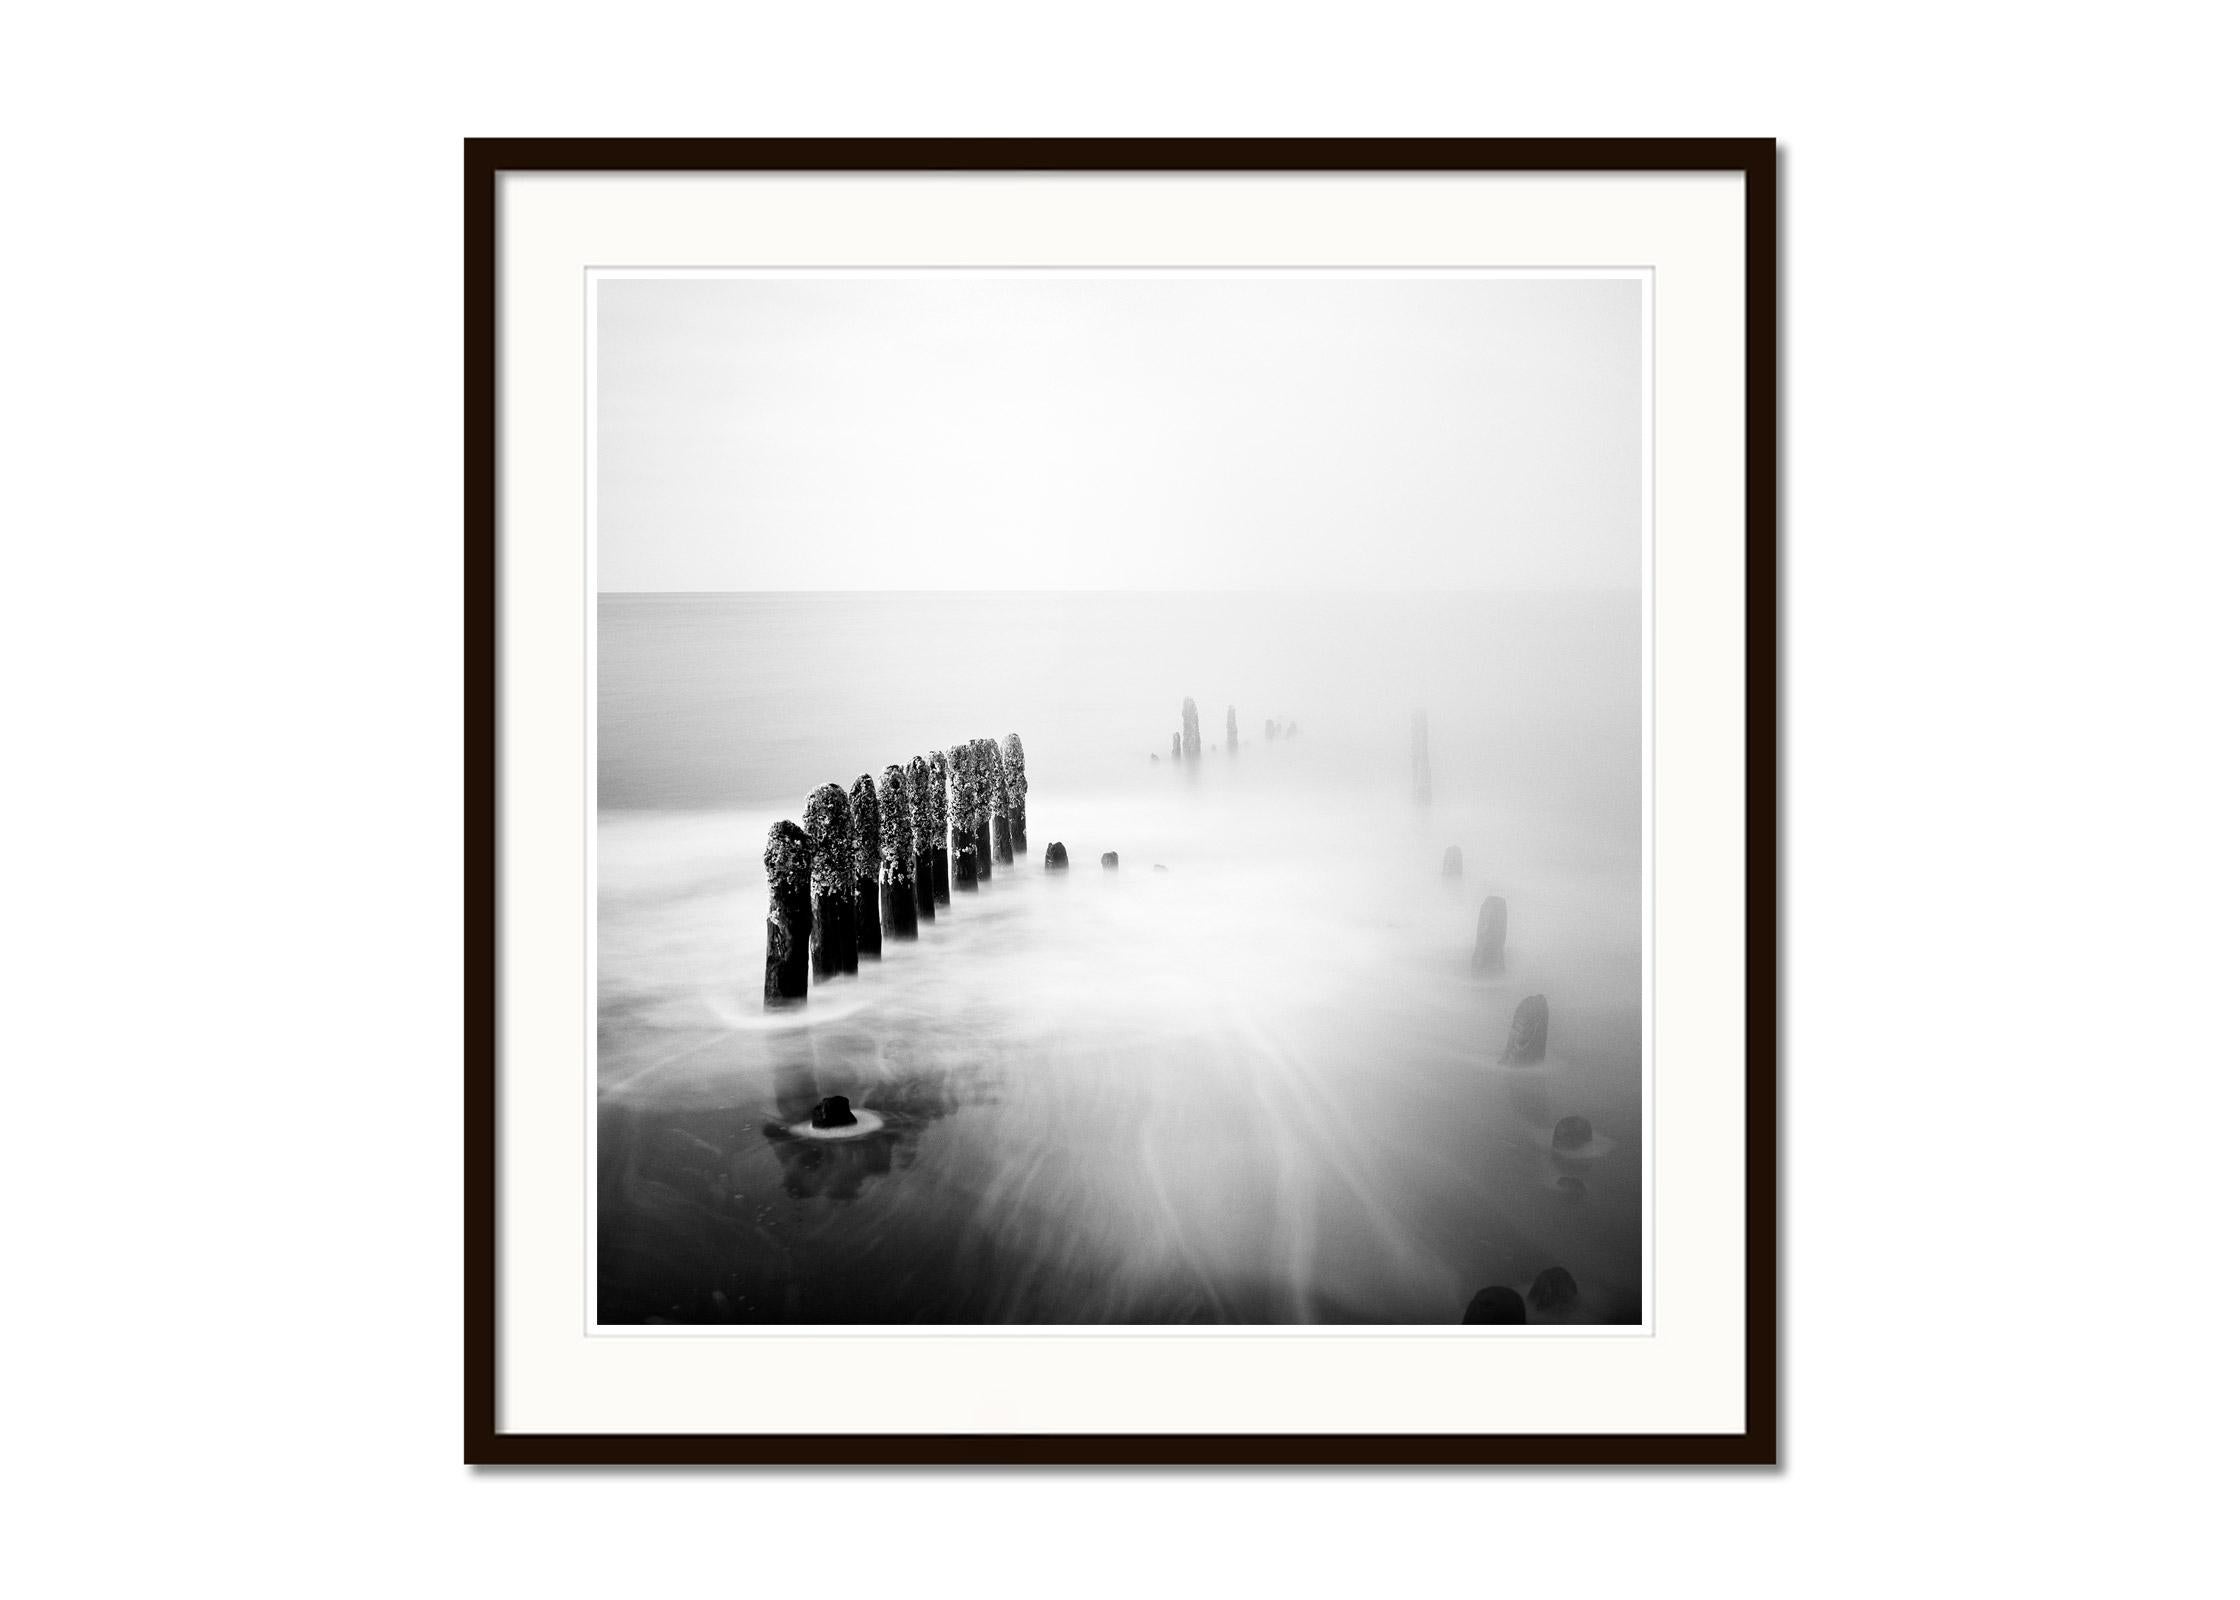 Asparagus Time, Ruegen, Germany, minimalist, black and white landscape art print - Gray Black and White Photograph by Gerald Berghammer